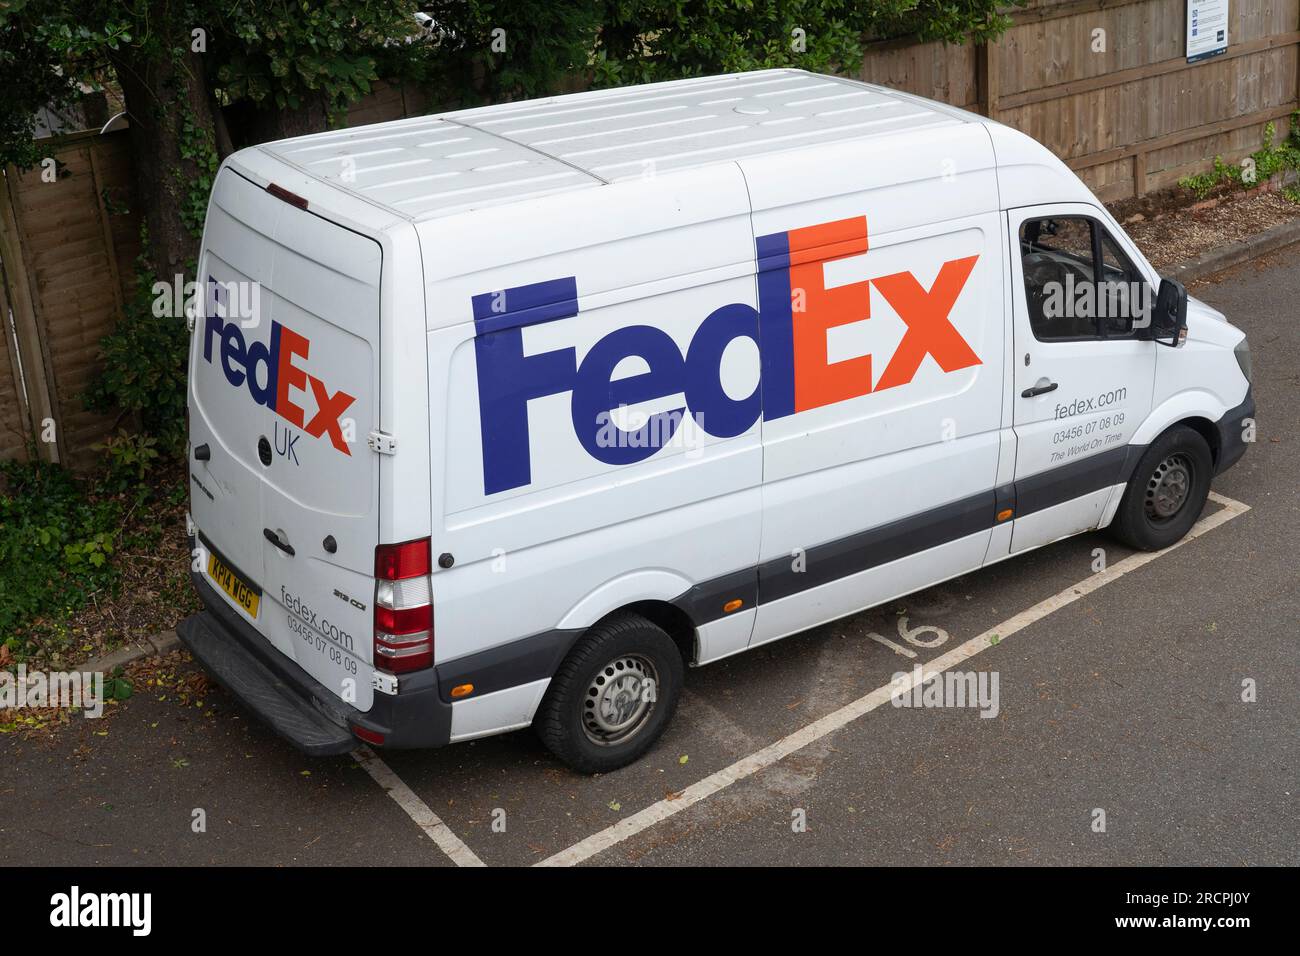 FedEx white delivery van with FedEx logo and livery parked in front of a house in England. Theme: b2b shipments, express delivery, parcel delivery Stock Photo